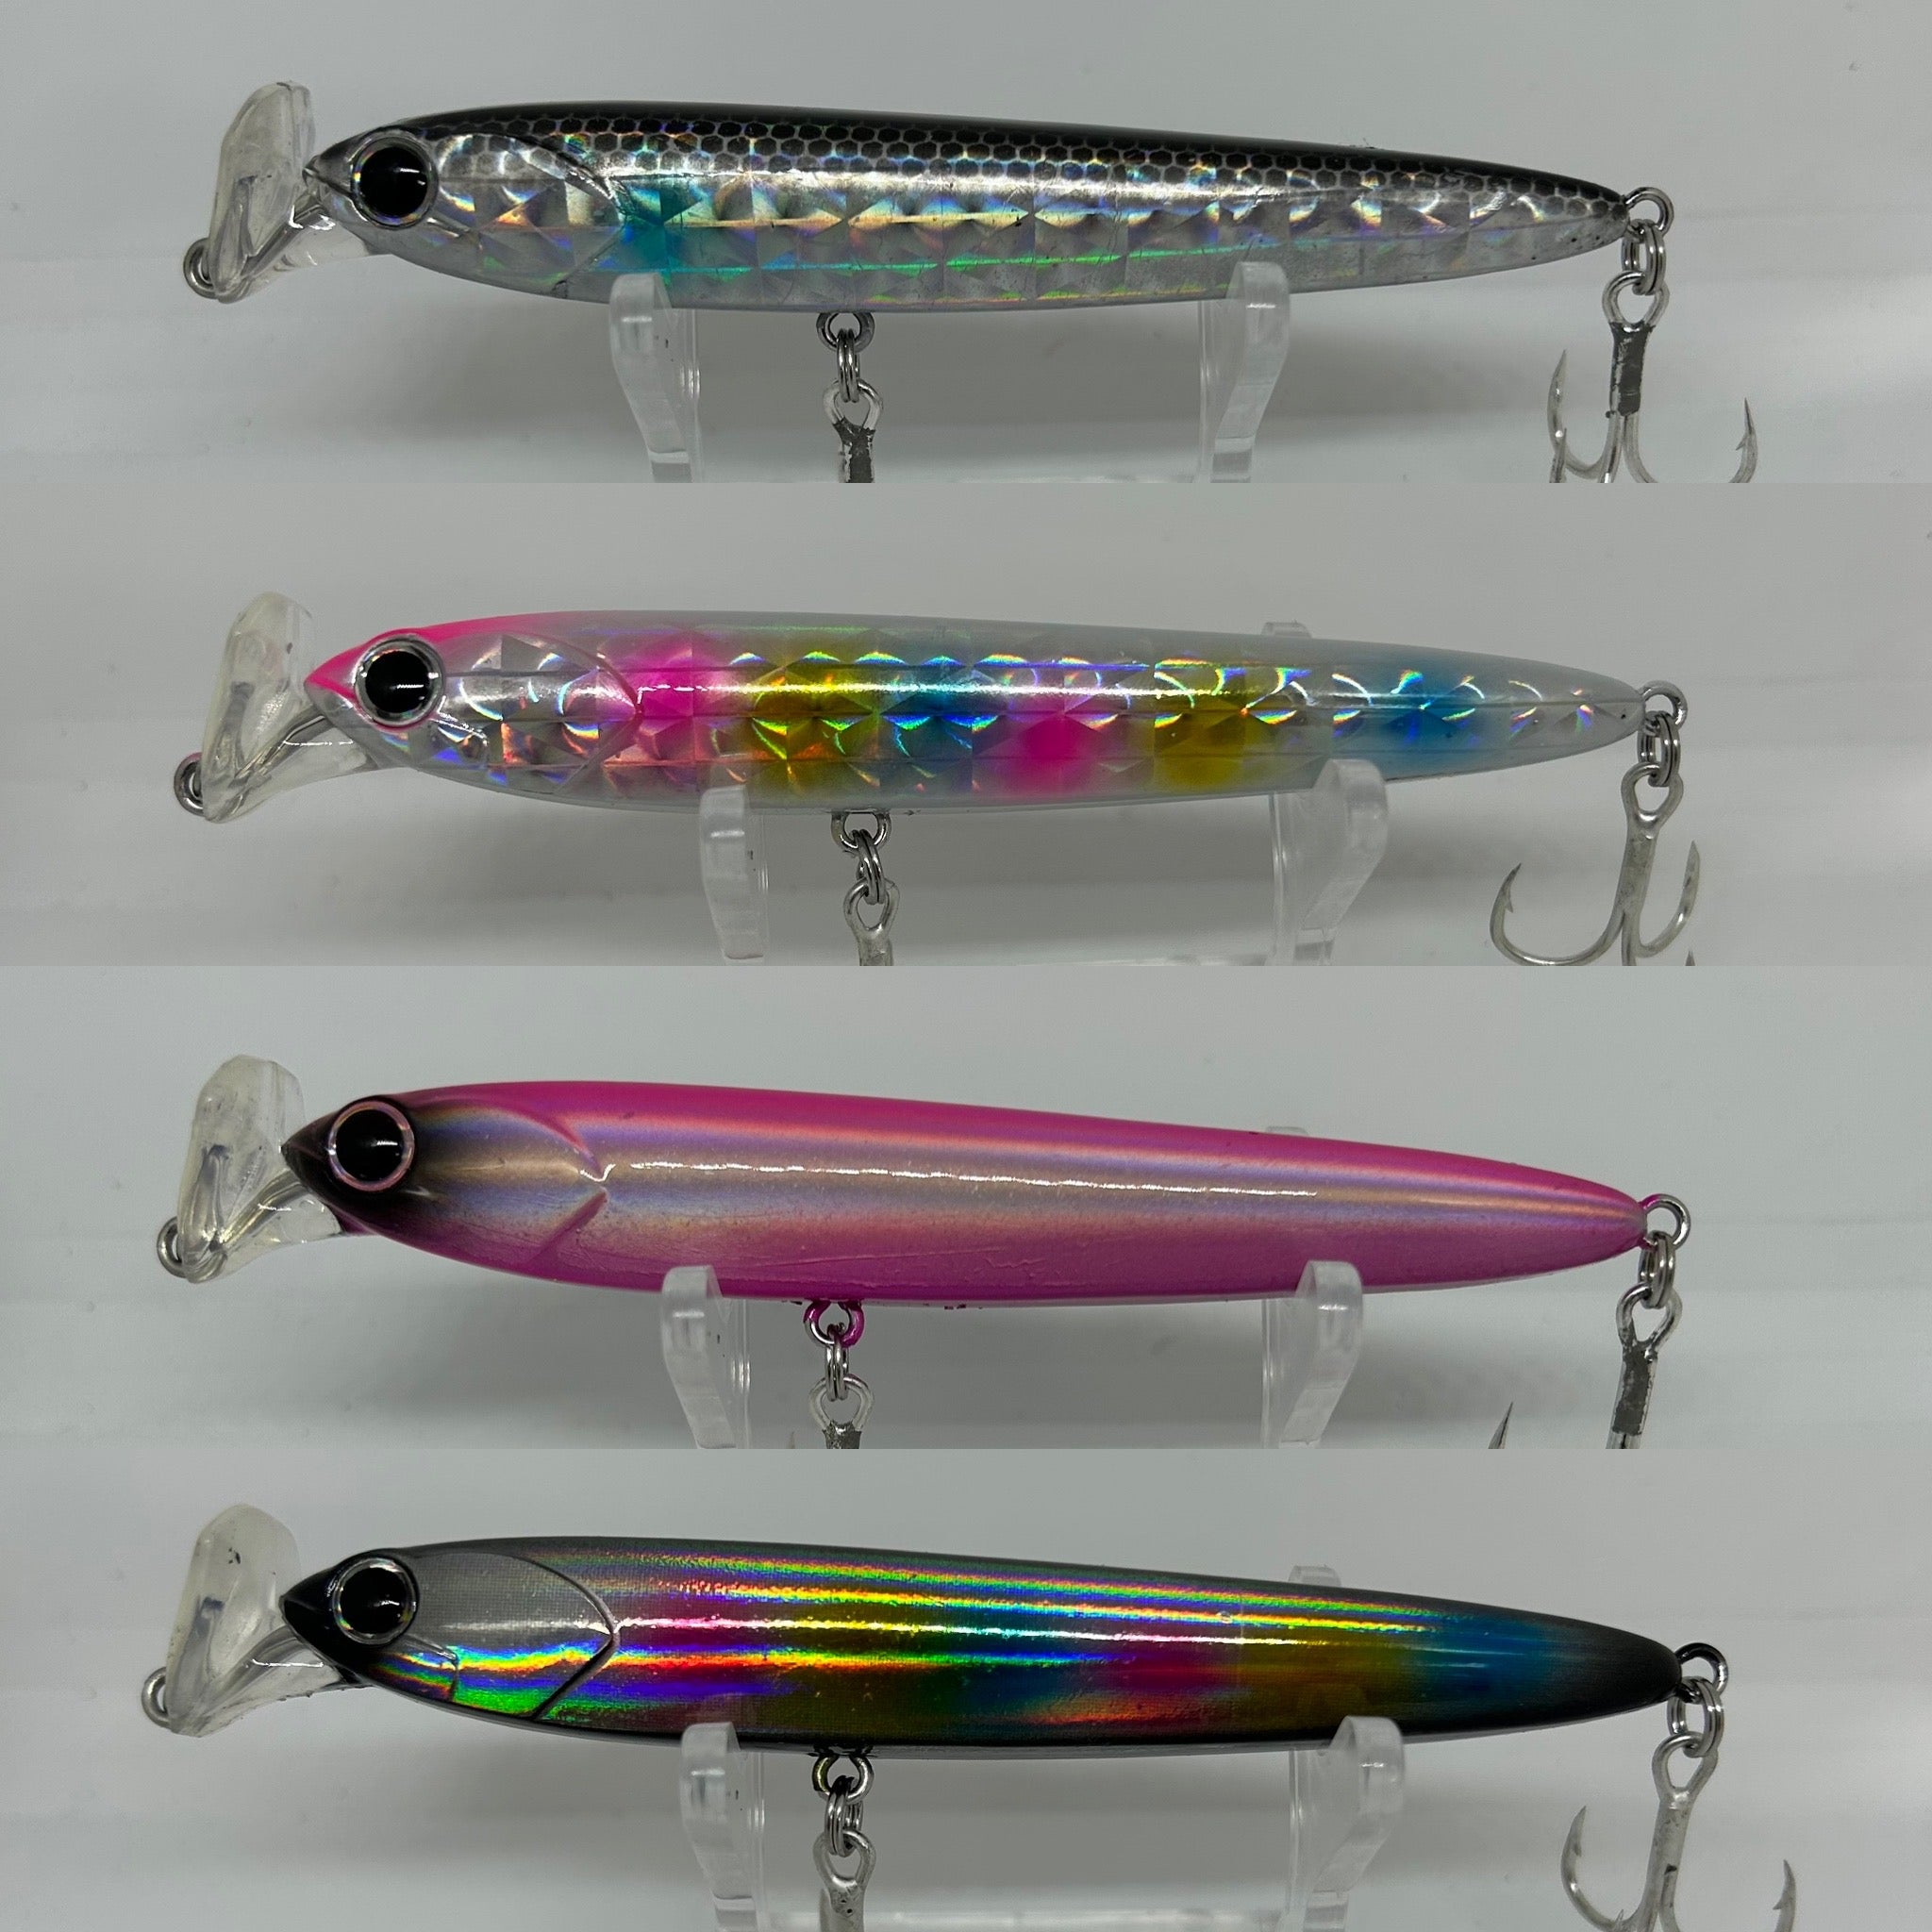 Baits Lures 2022 Metal Jig Fishing Lure Weights 20g 60g Trolling Hard Bait  Bass Fishing Bait Tackle Trout Jigging Lure Jigs Saltwater Lures HKD230710  From Fadacai06, $3.65